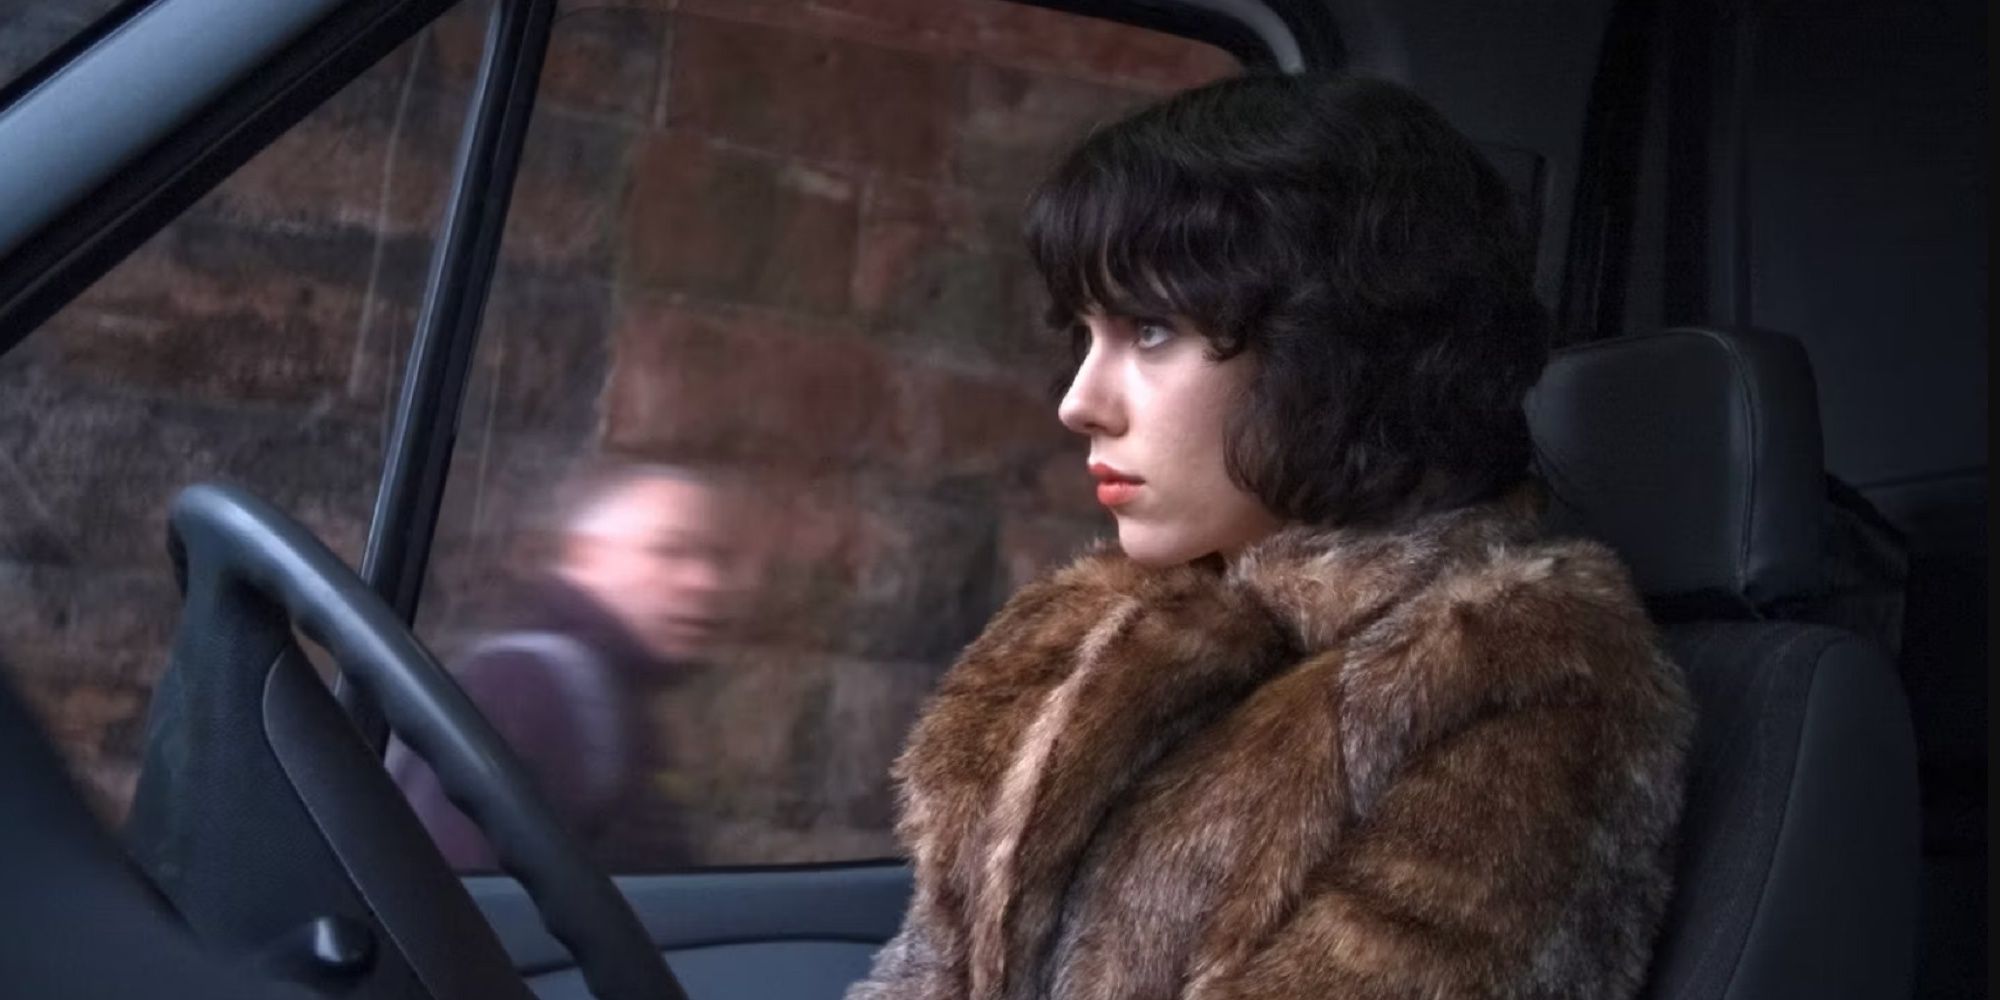 The Alien, played by Scarlett Johansson, drives by a man in the film Under the Skin.